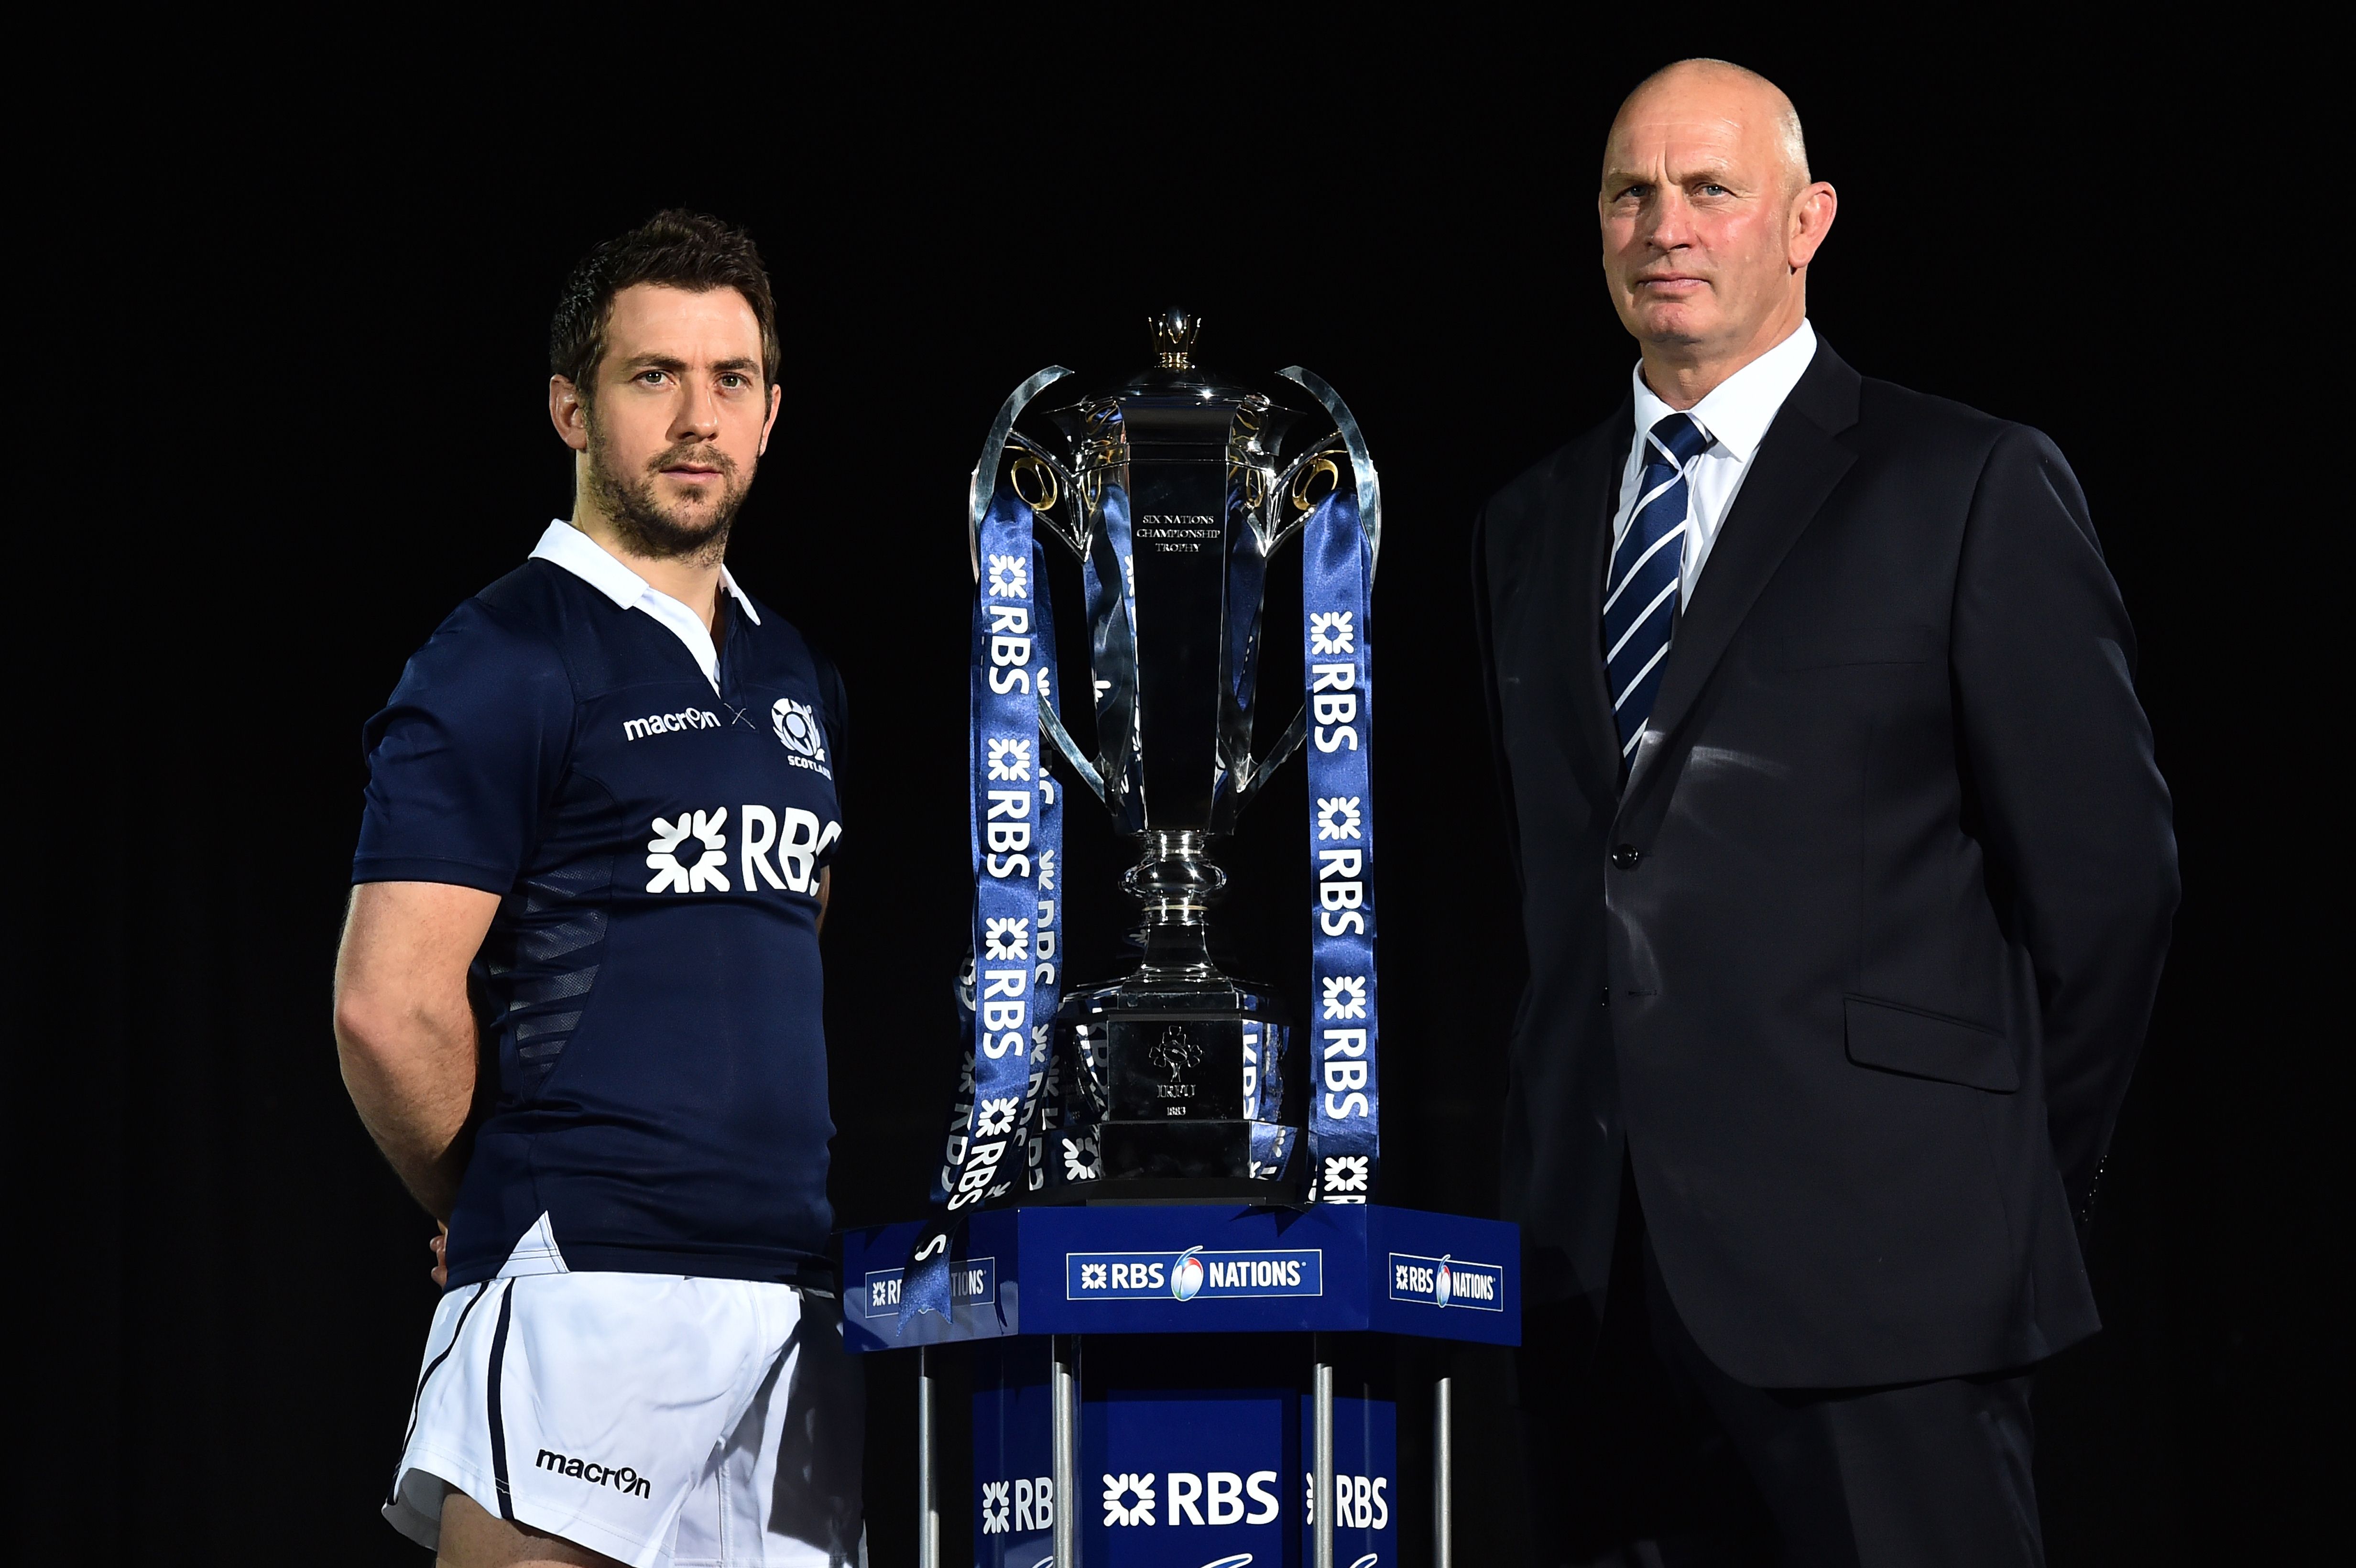 New Zealand-born coach Vern Cotter, pictured with captain Greig Laidlaw, brings new hope for Scotland going into their Six Nations opener against France. Photo: AFP